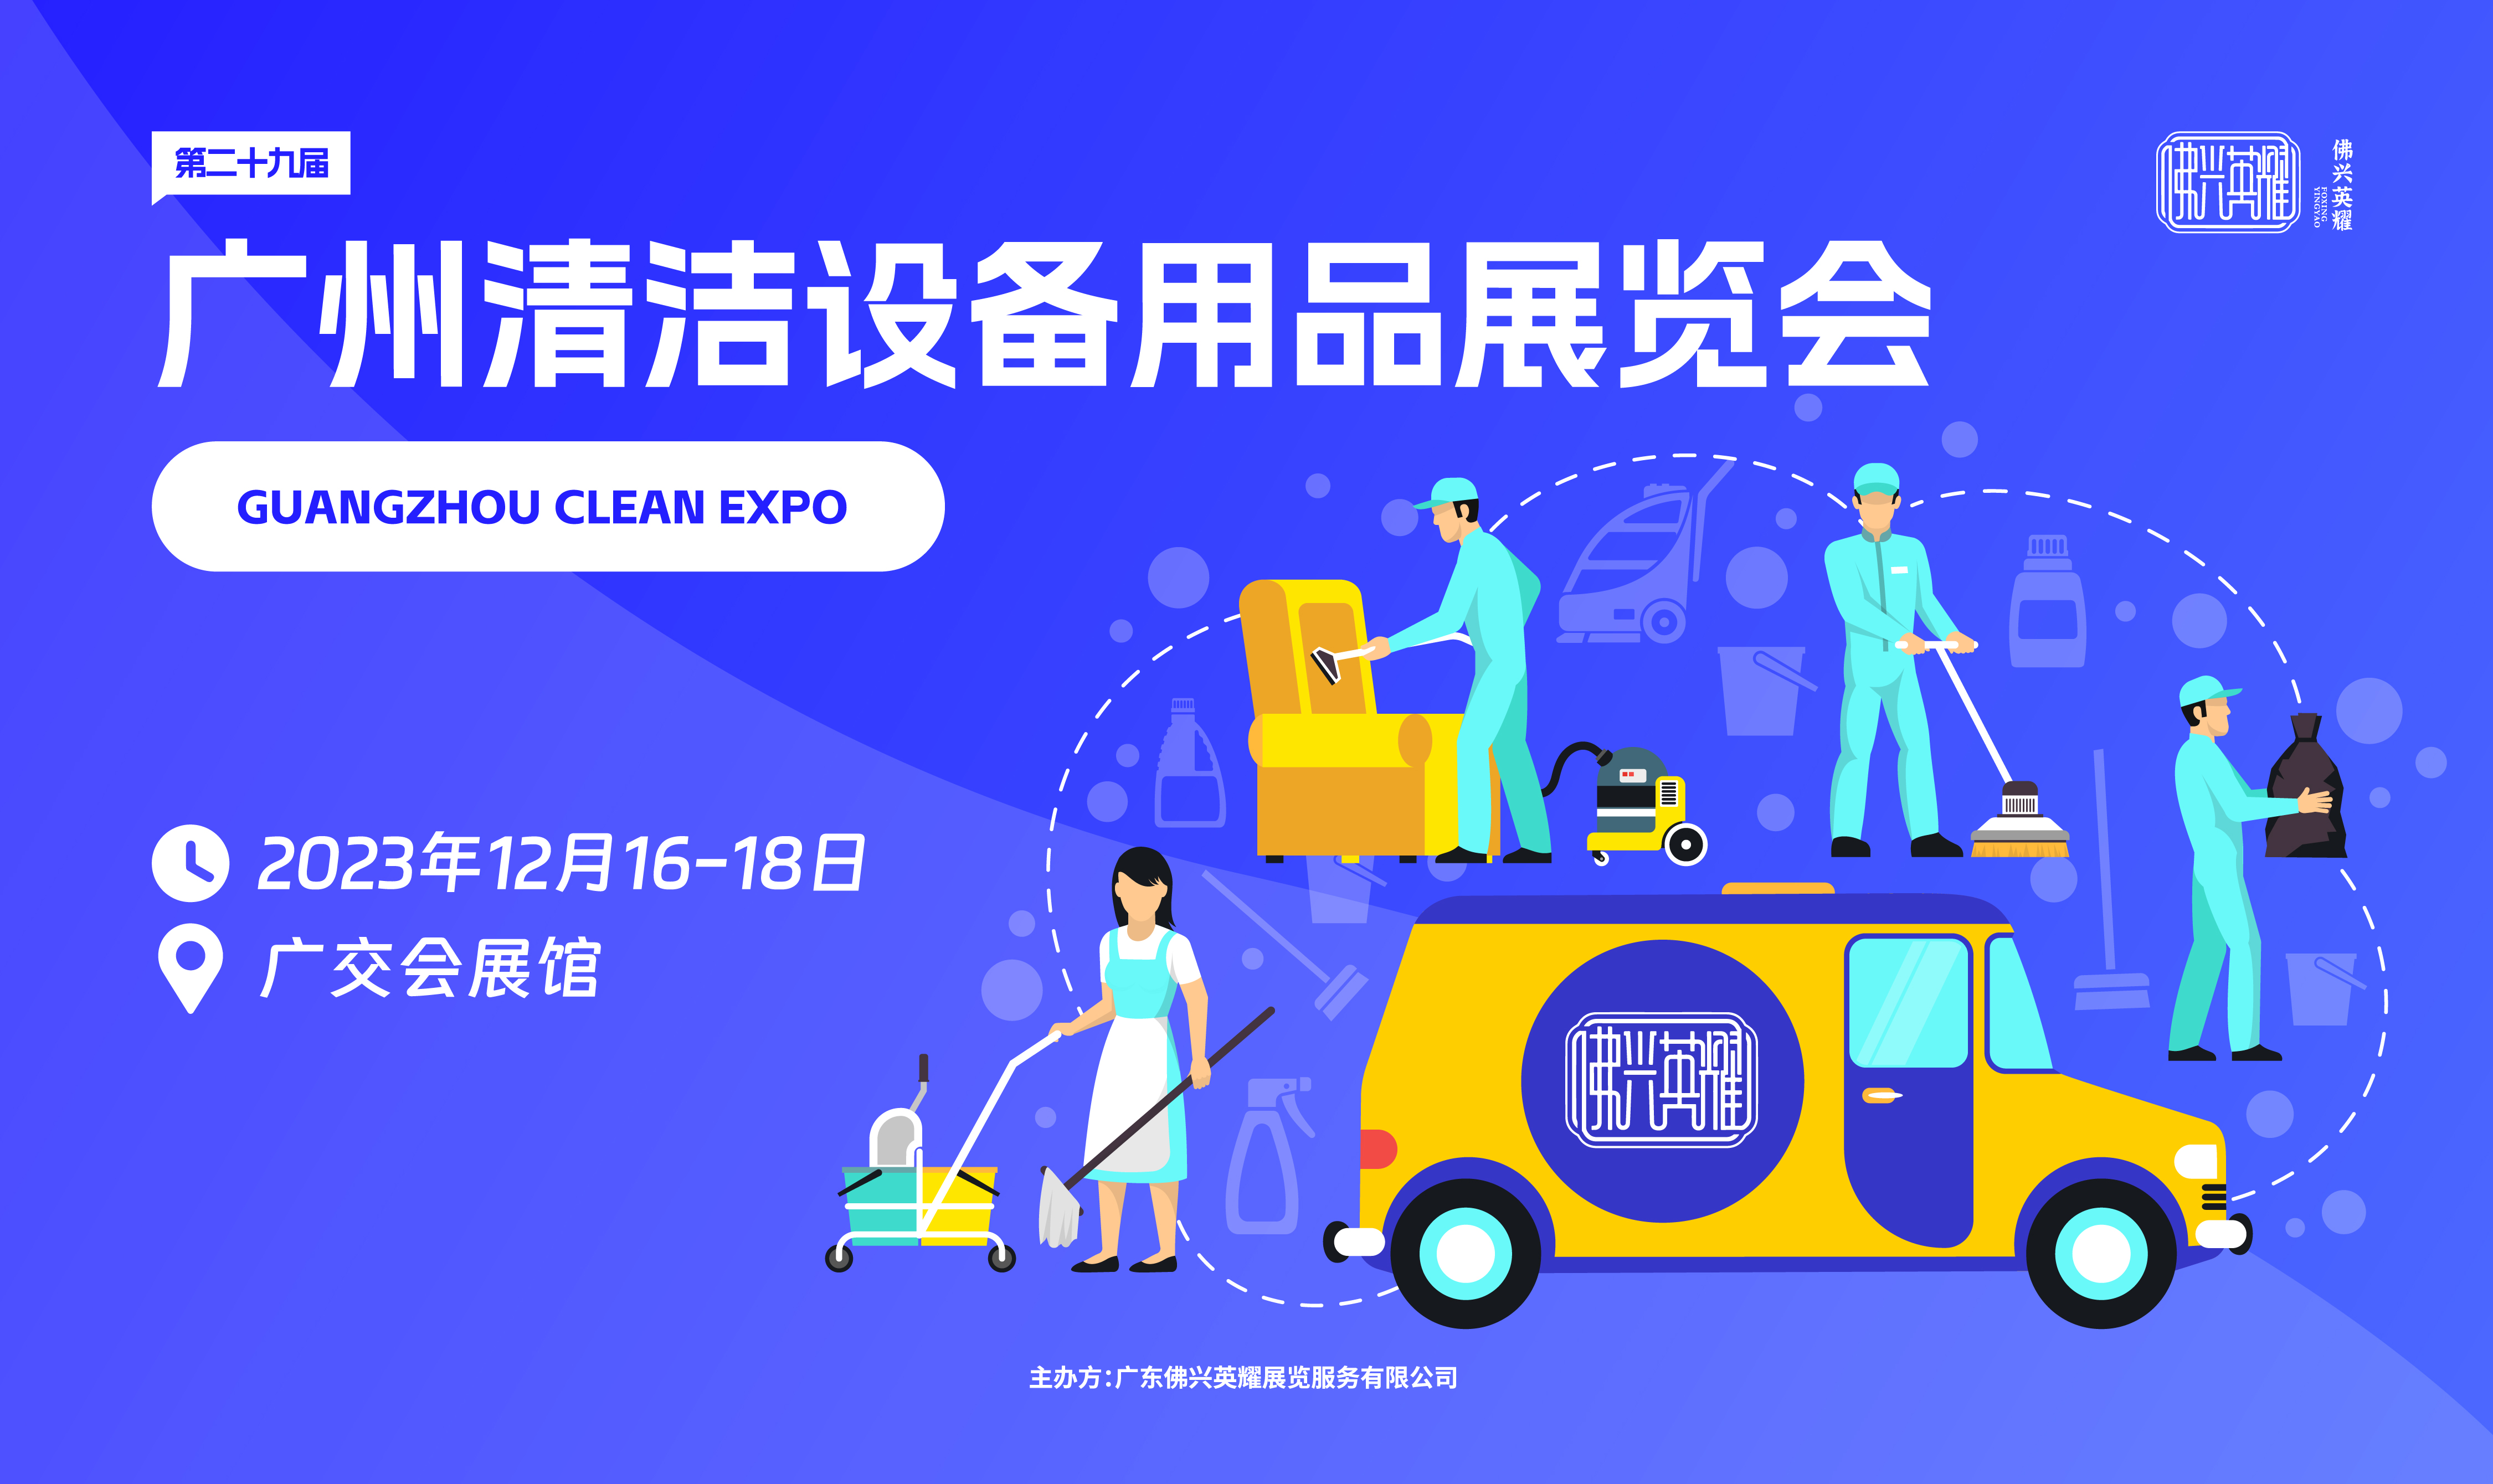 2023 The 29th Guangzhou cleaning equipment and supplies exhibition